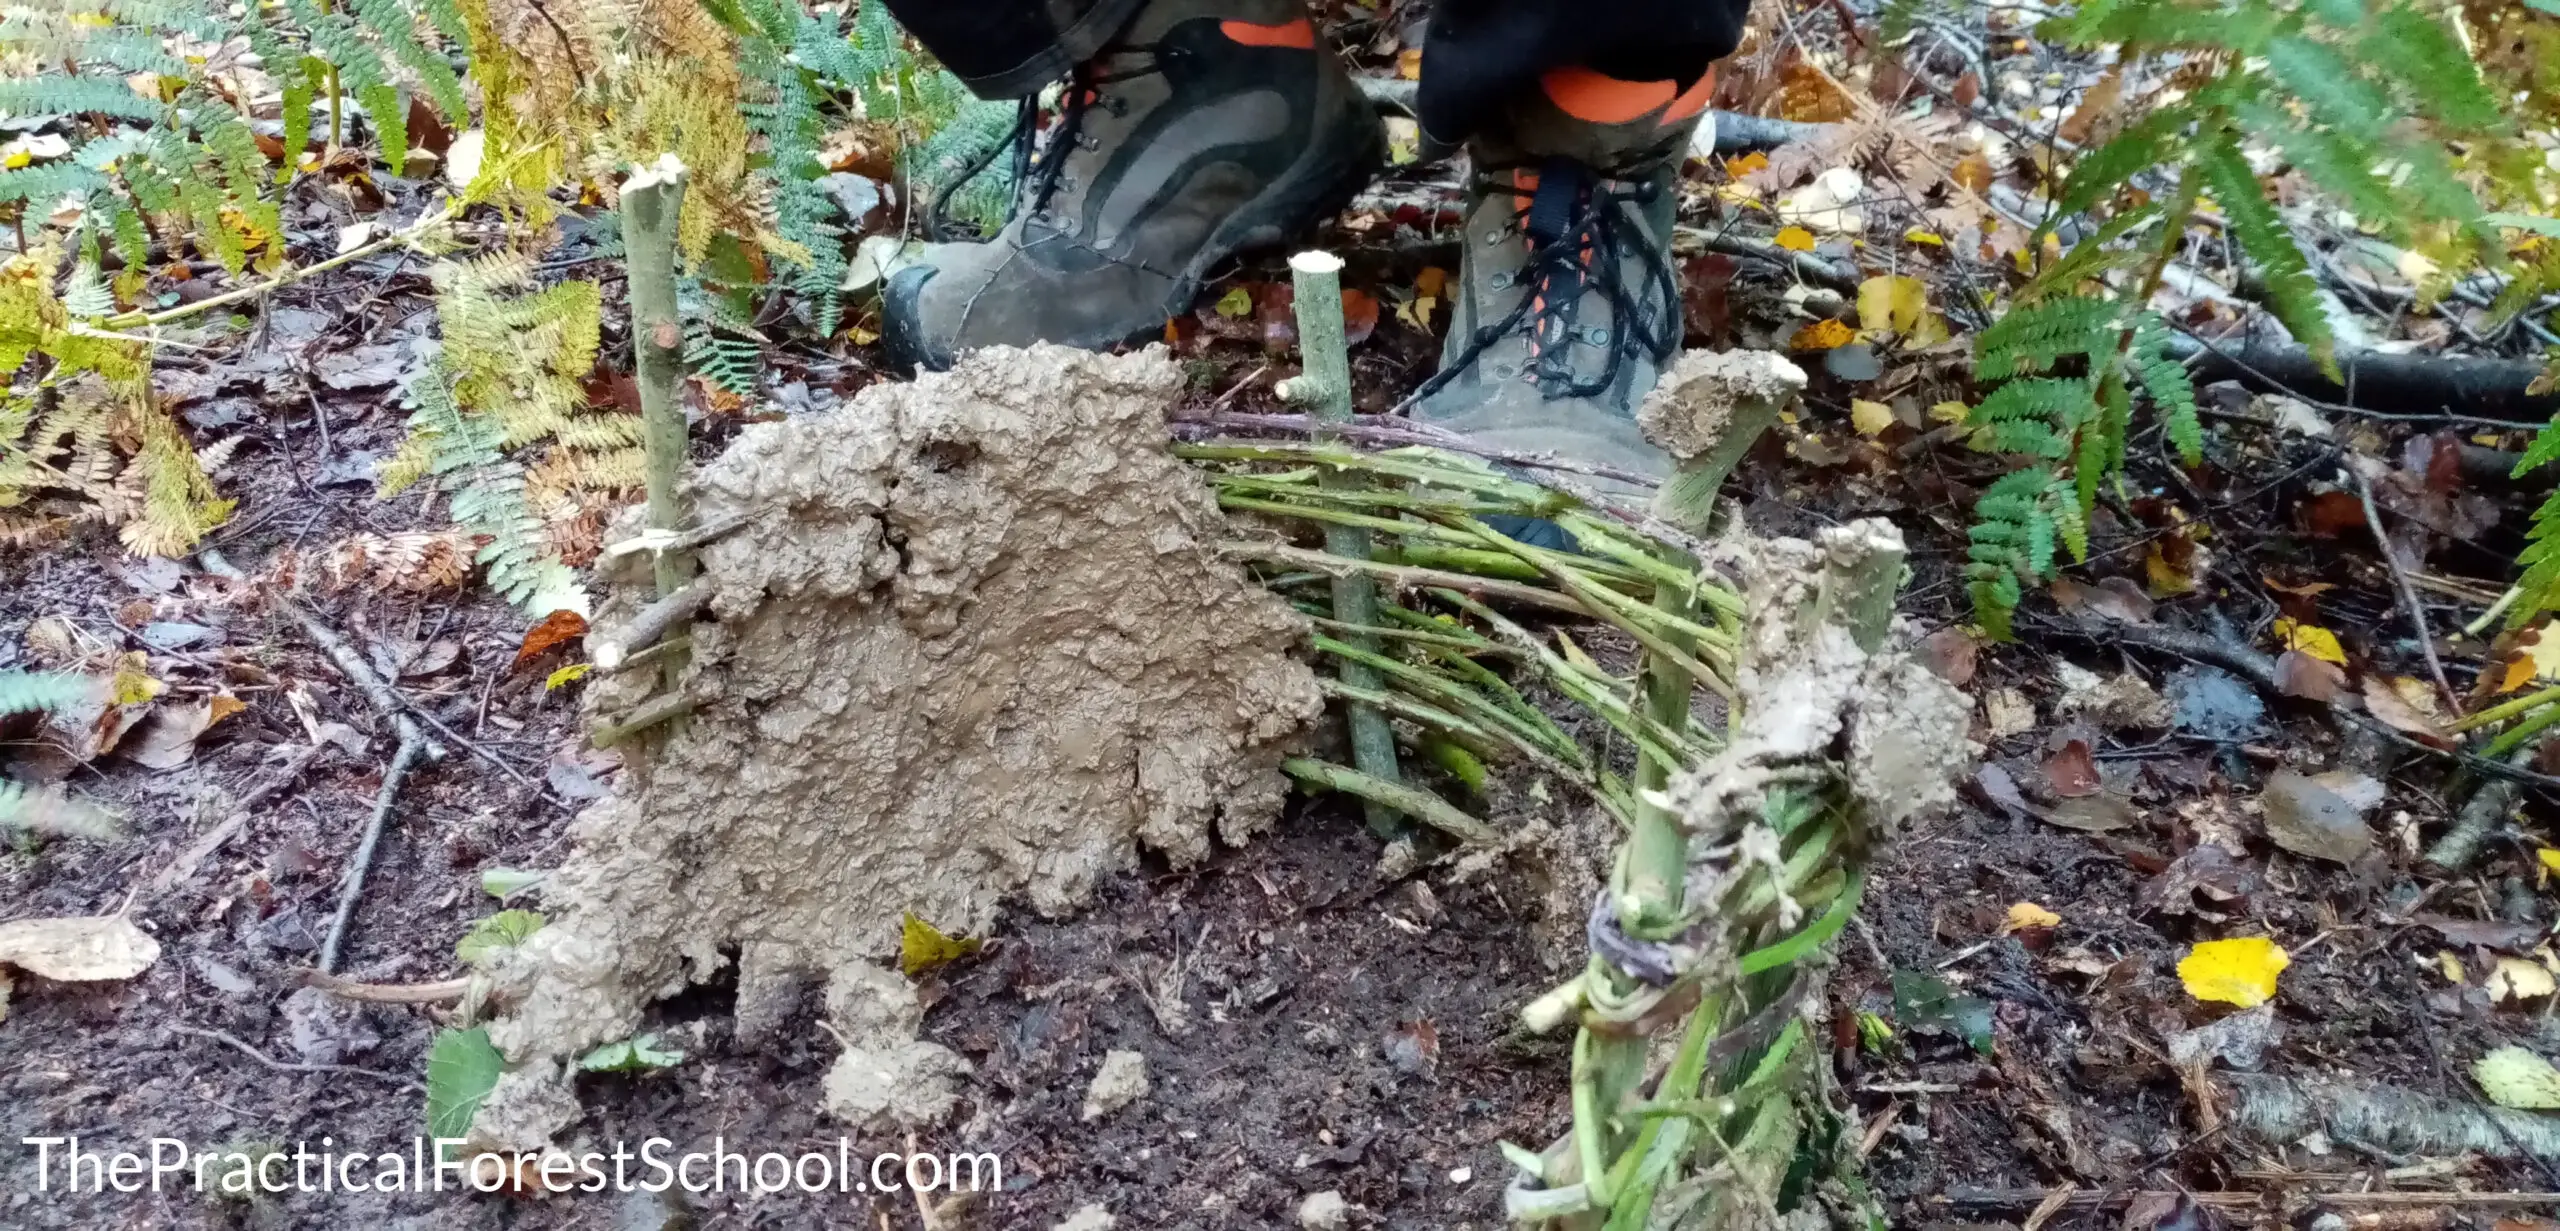 Using sticks and mud to make a mini home for minibeasts